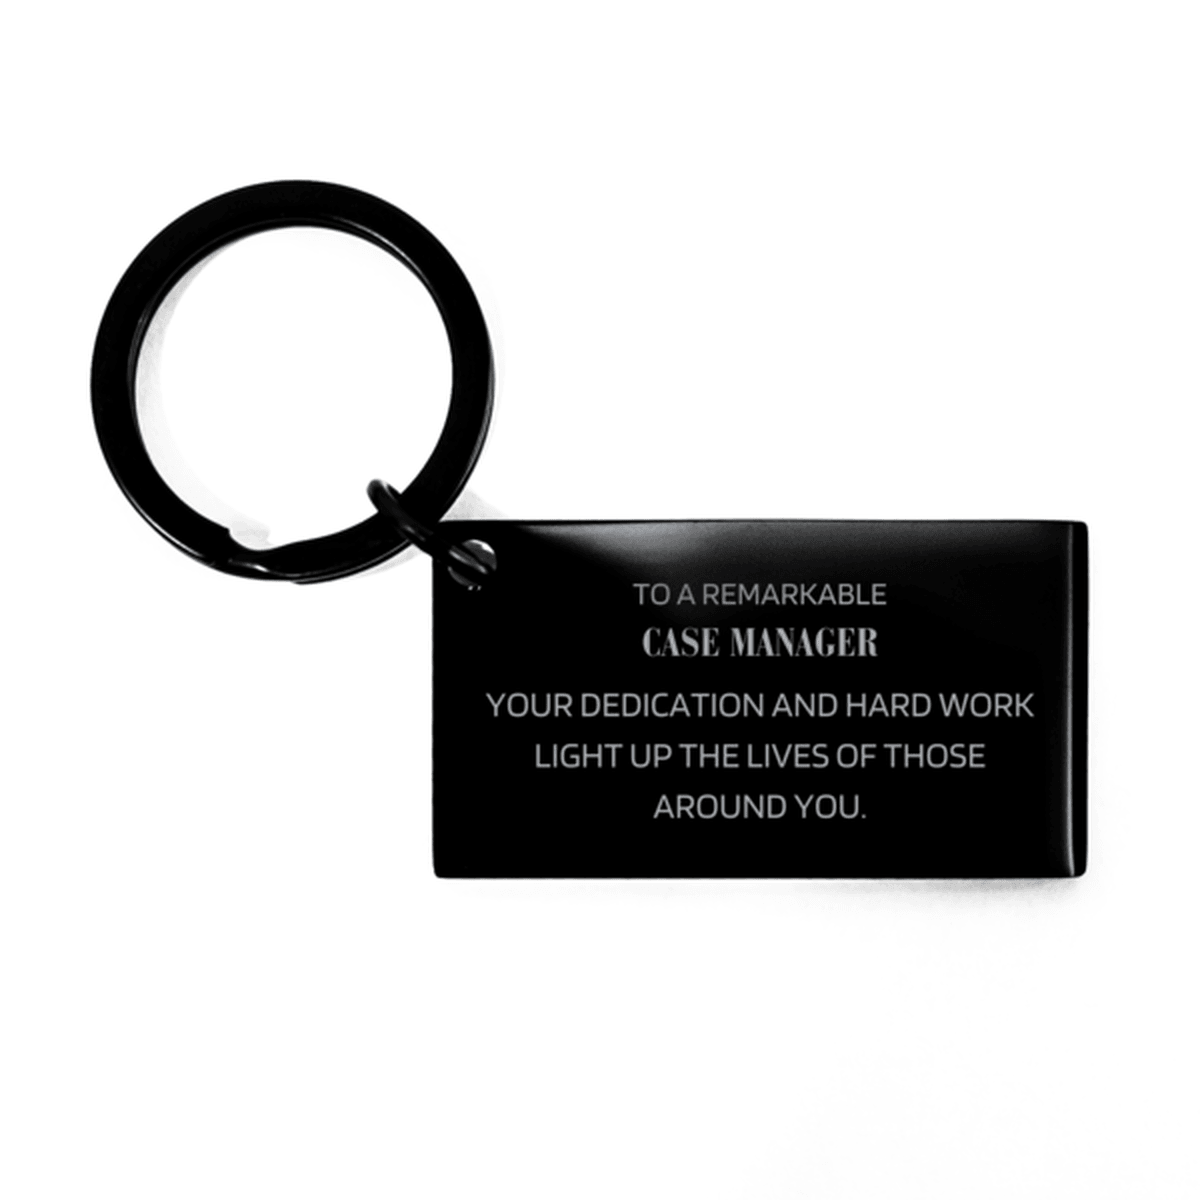 Remarkable Case Manager Gifts, Your dedication and hard work, Inspirational Birthday Christmas Unique Keychain For Case Manager, Coworkers, Men, Women, Friends - Mallard Moon Gift Shop